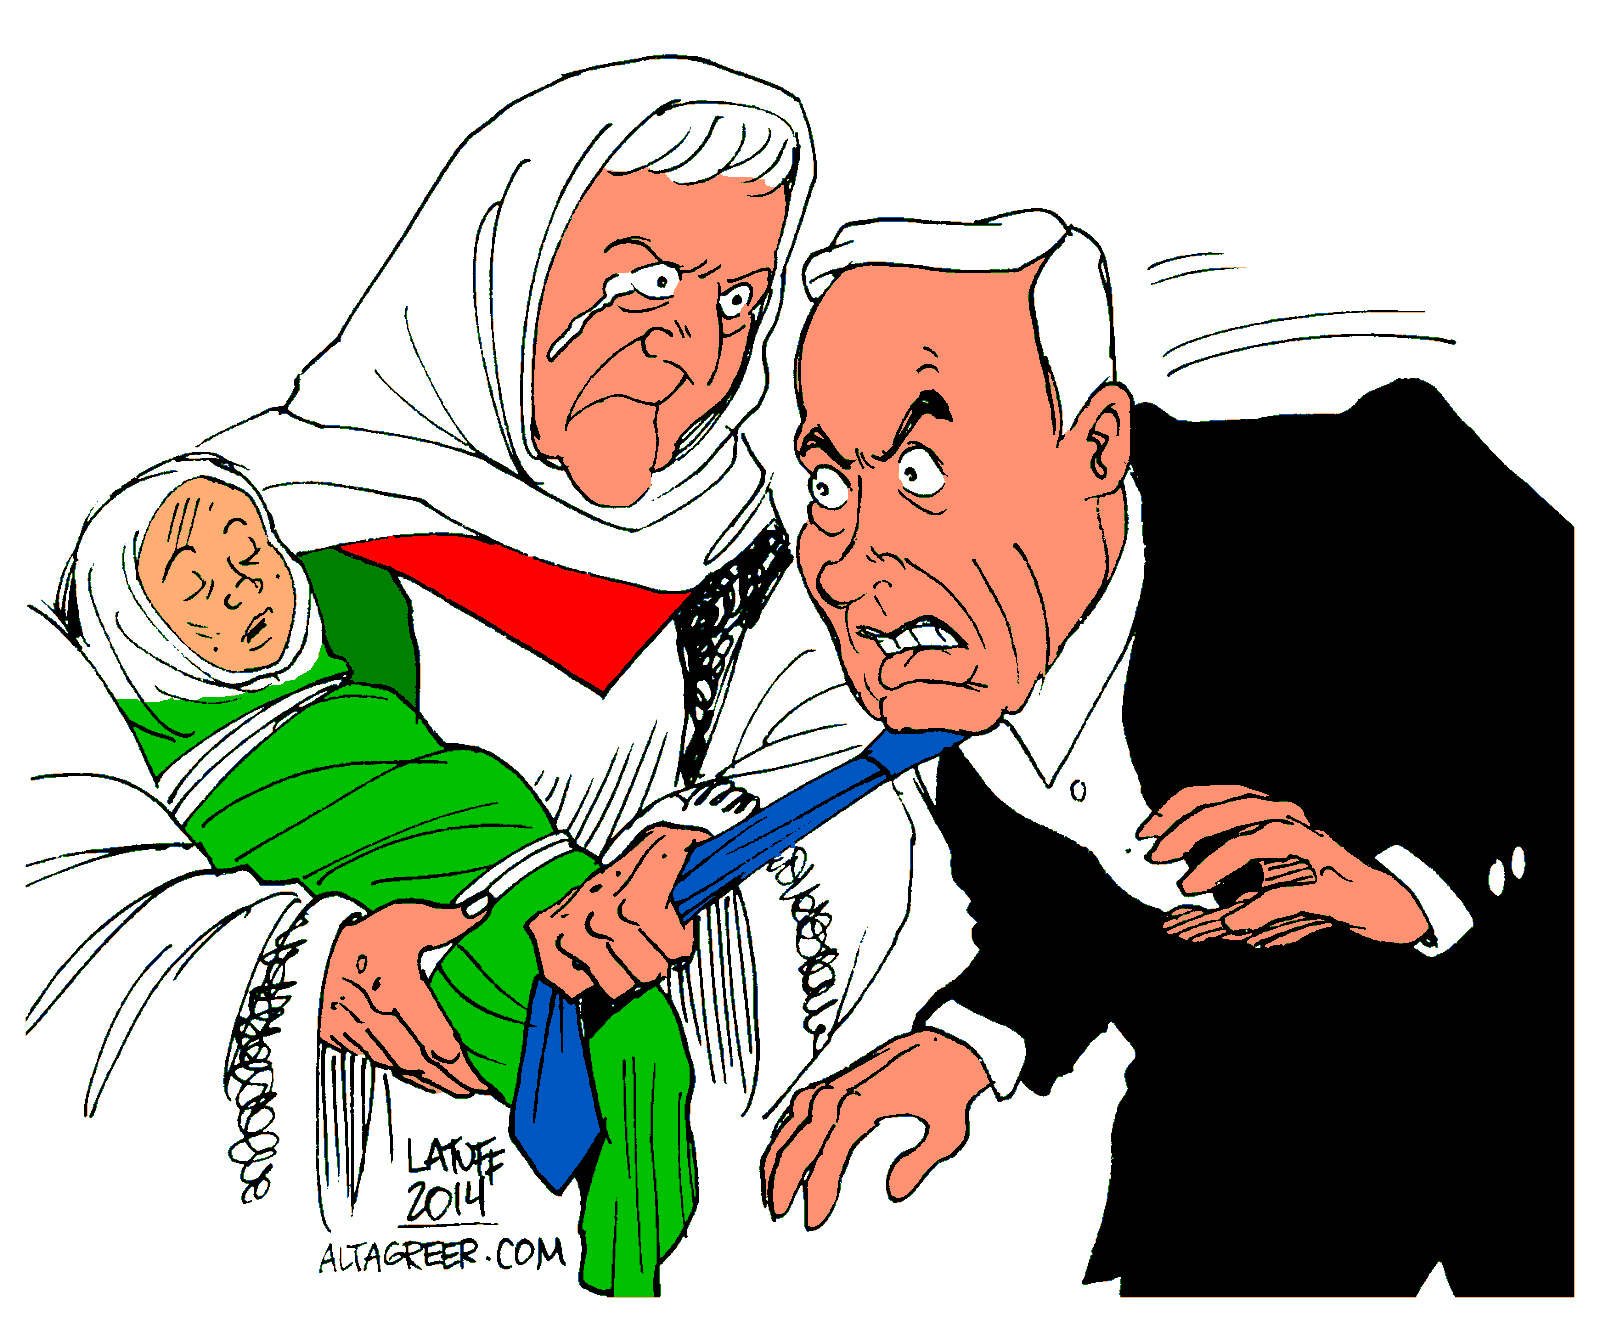 Les Palestiniens ont besoin de notre rage Hey-netanyahu-look-what-youve-done-says-mother-palestine-al